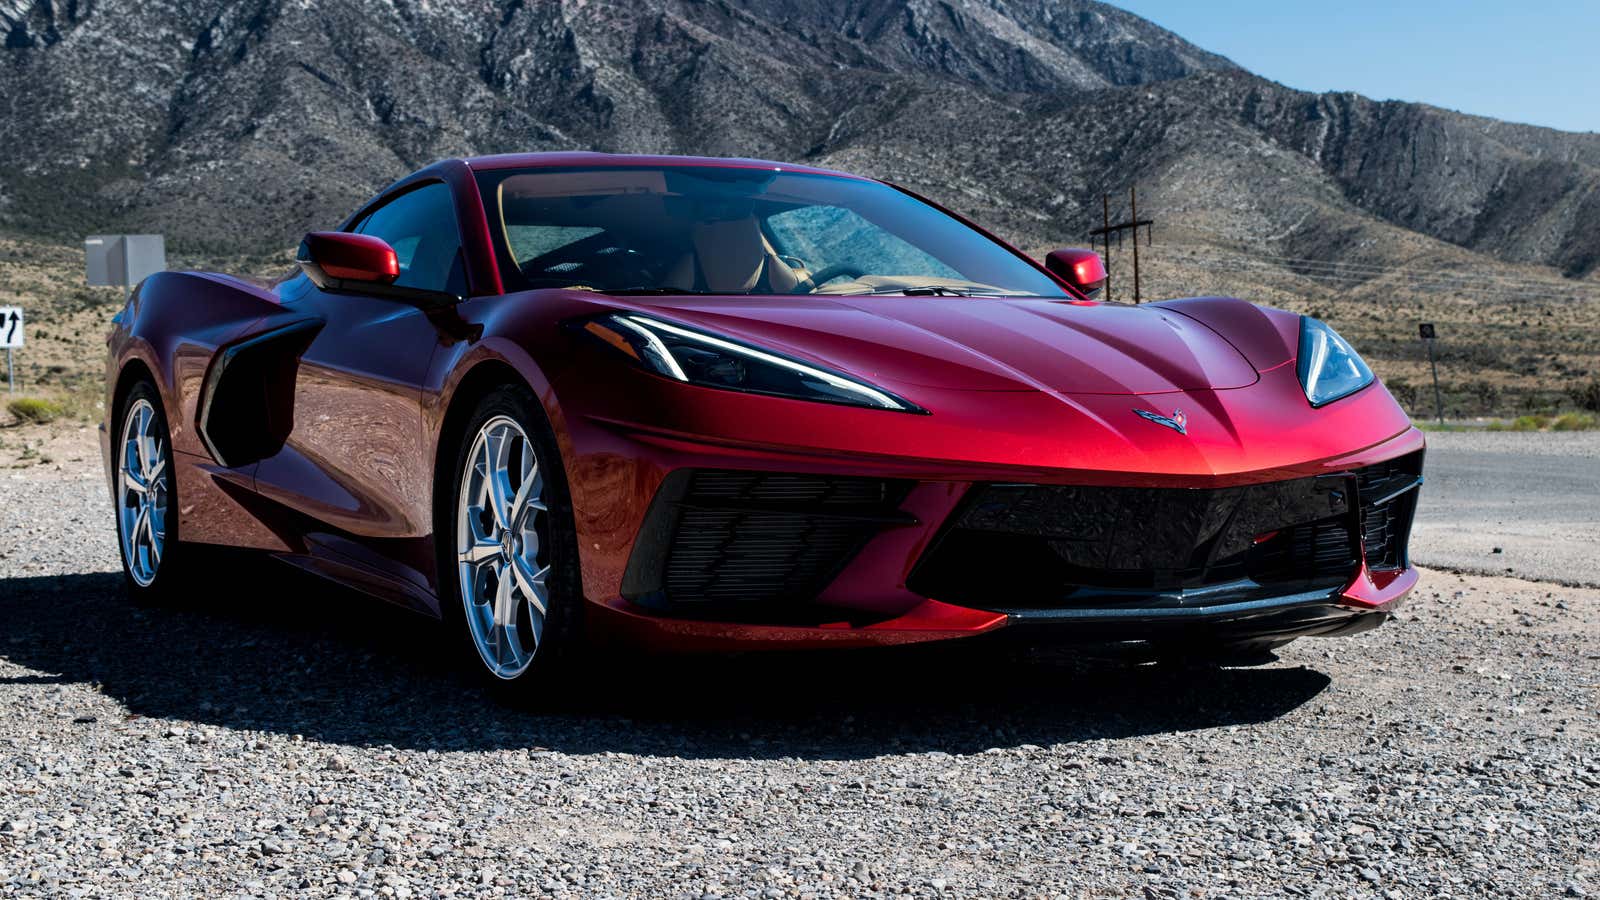 Review: The 2021 Corvette Stingray Is The Best Of Audacious American Power